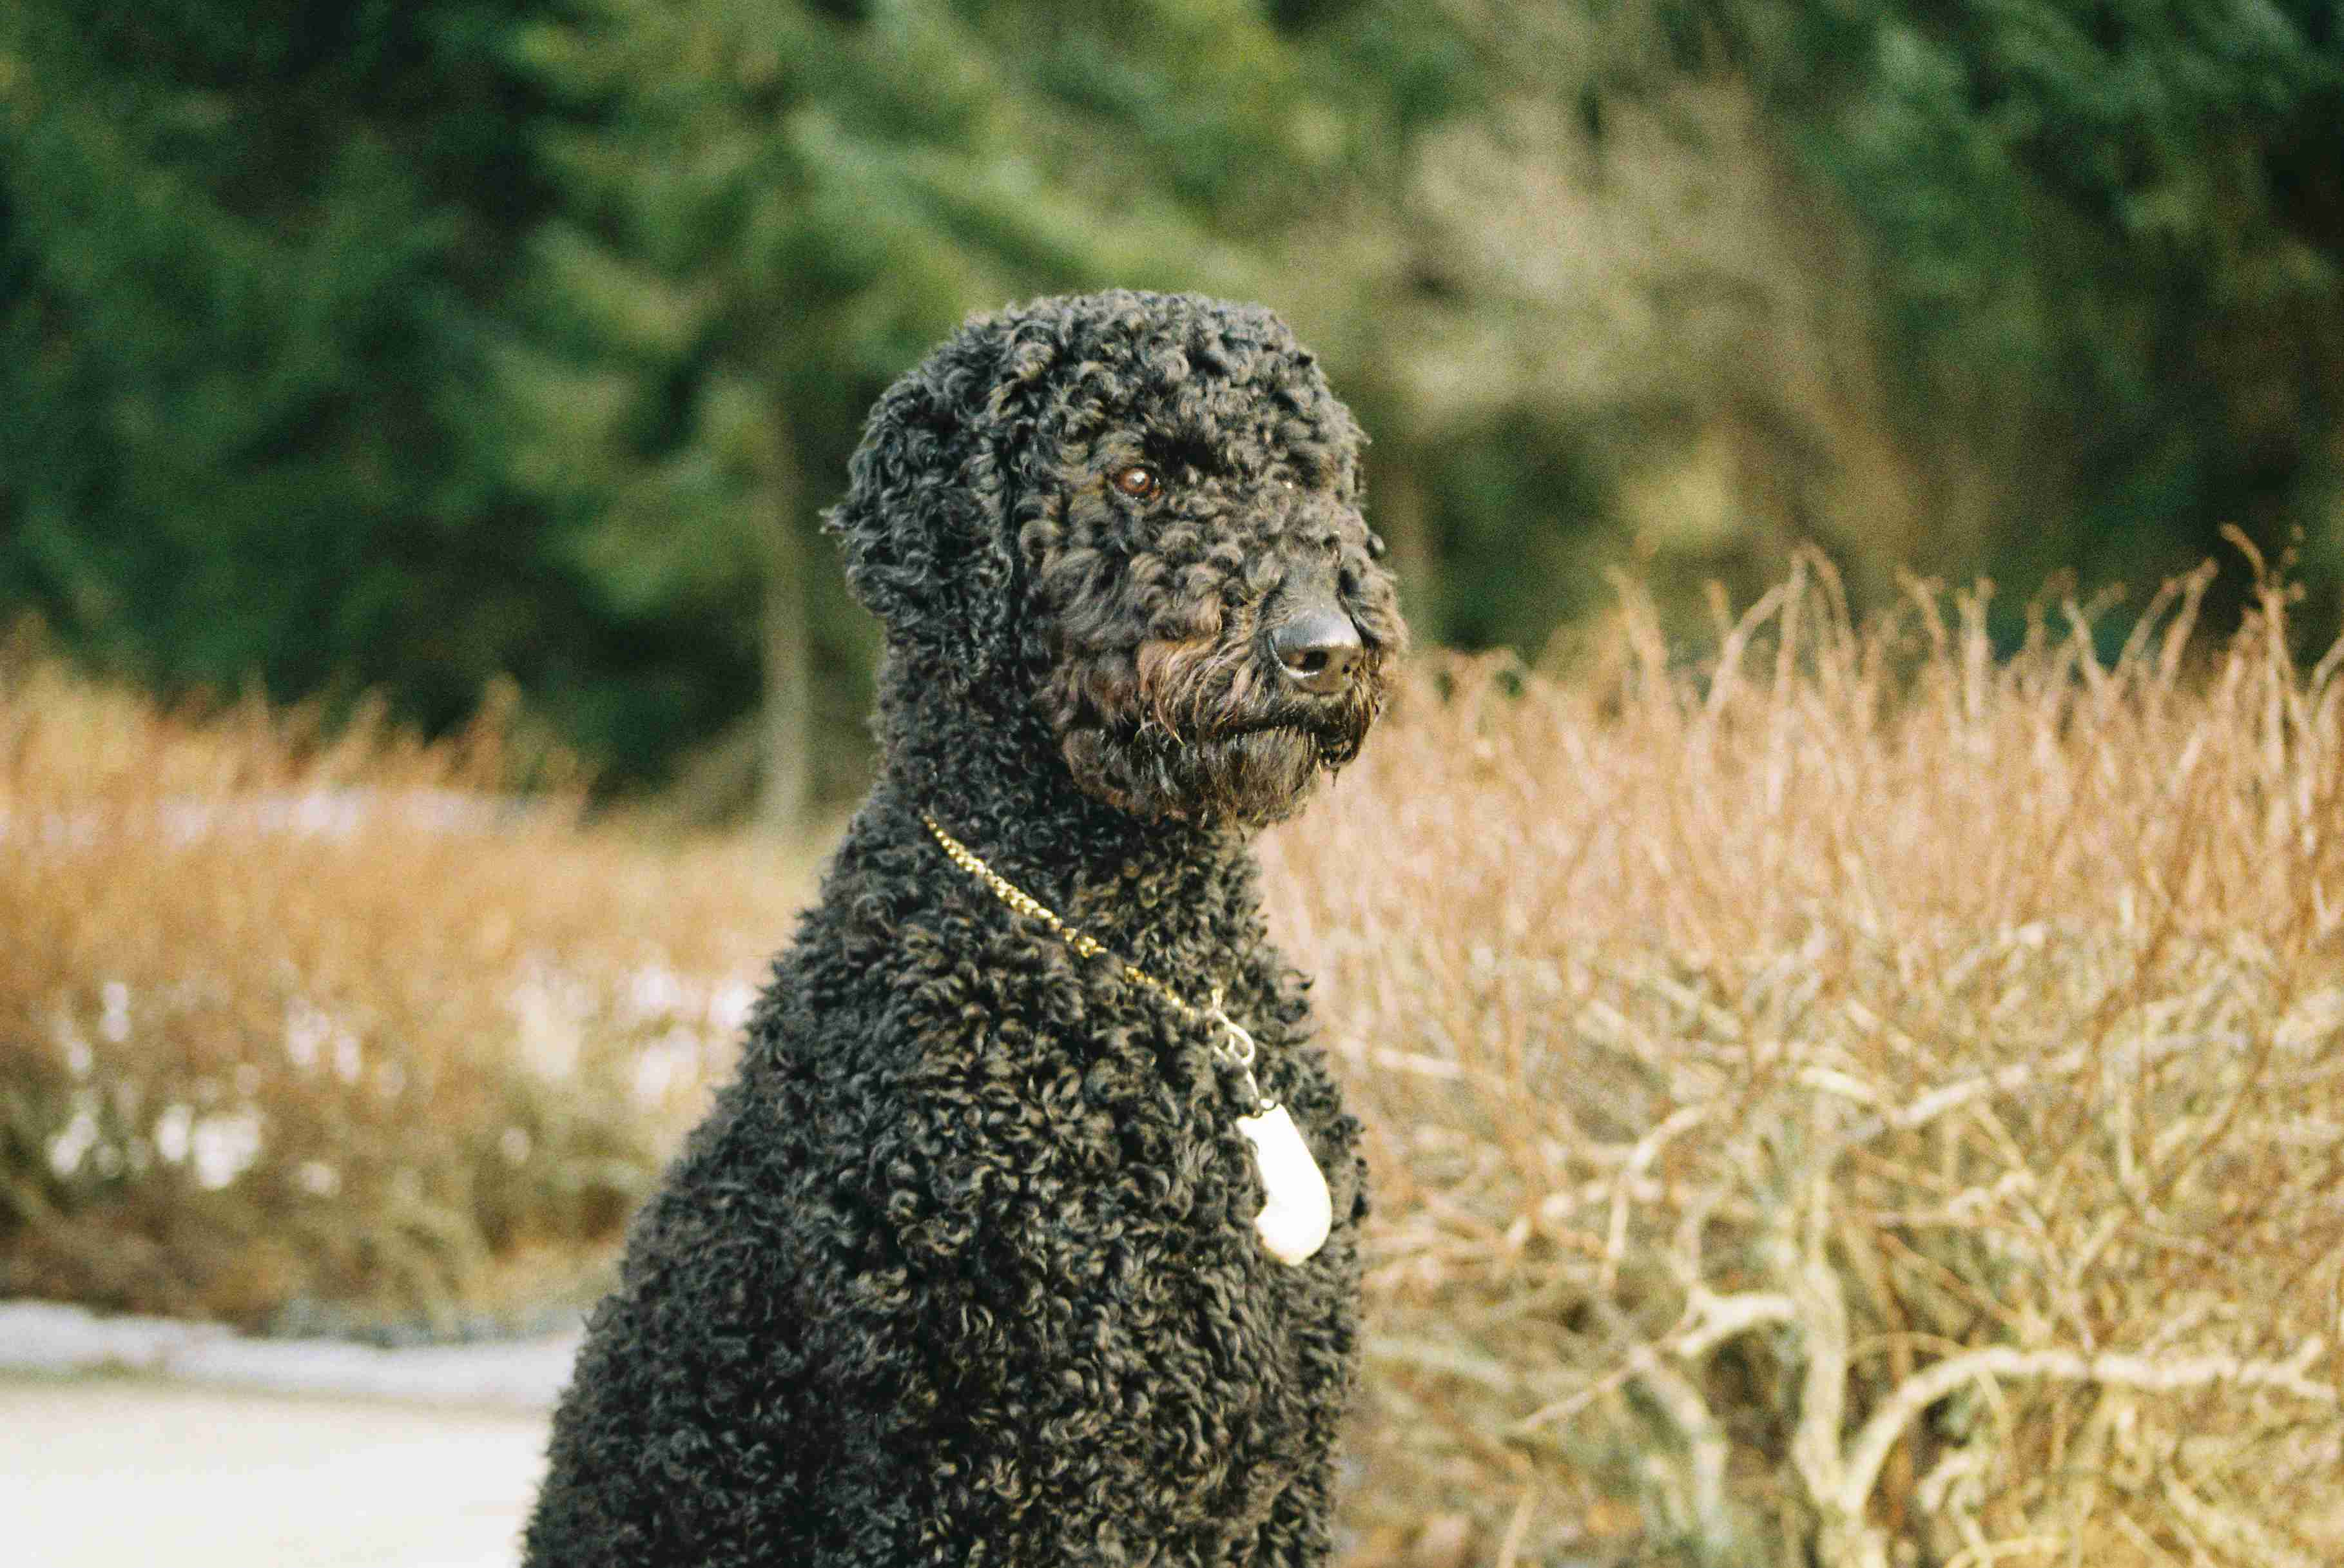 Are there any specific eye conditions that Poodles are prone to?